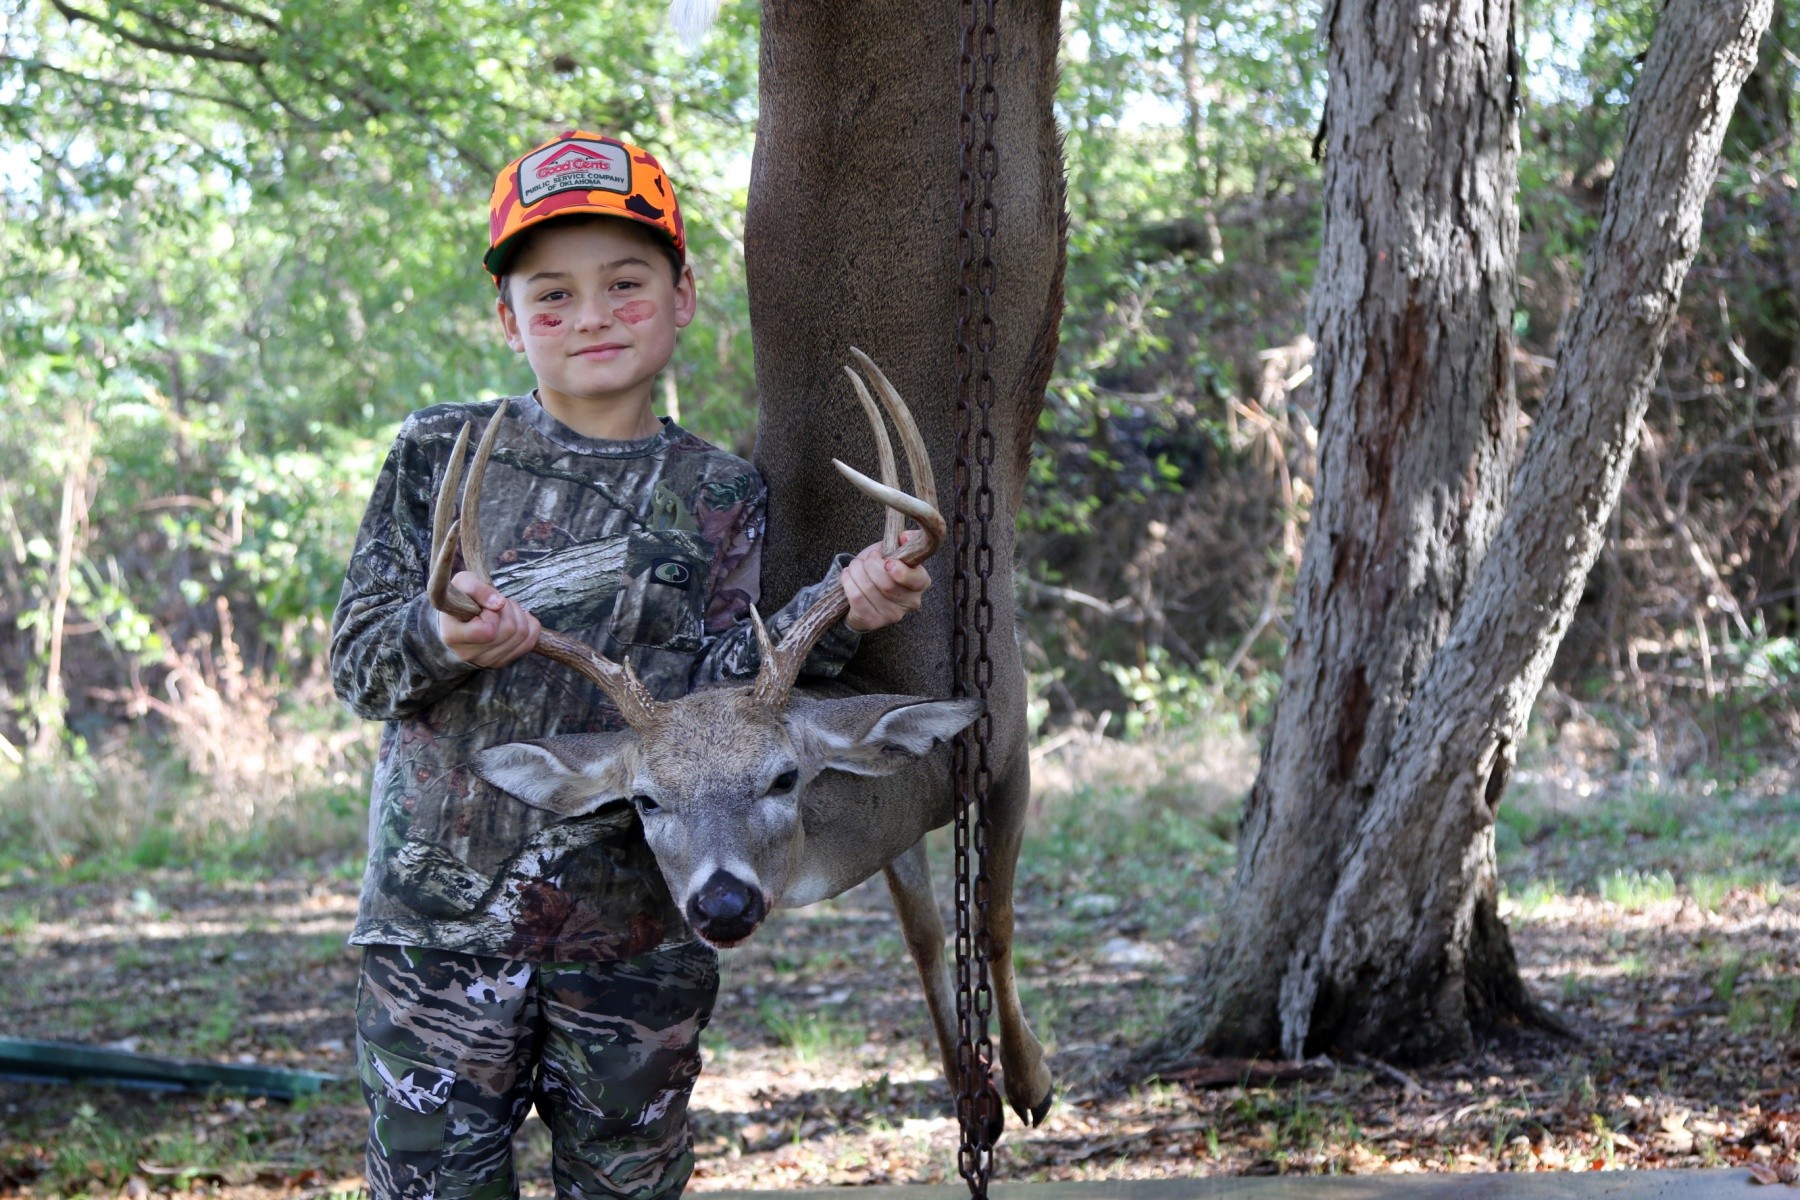 Second Annual Hugo Lake youth hunt success Article The United